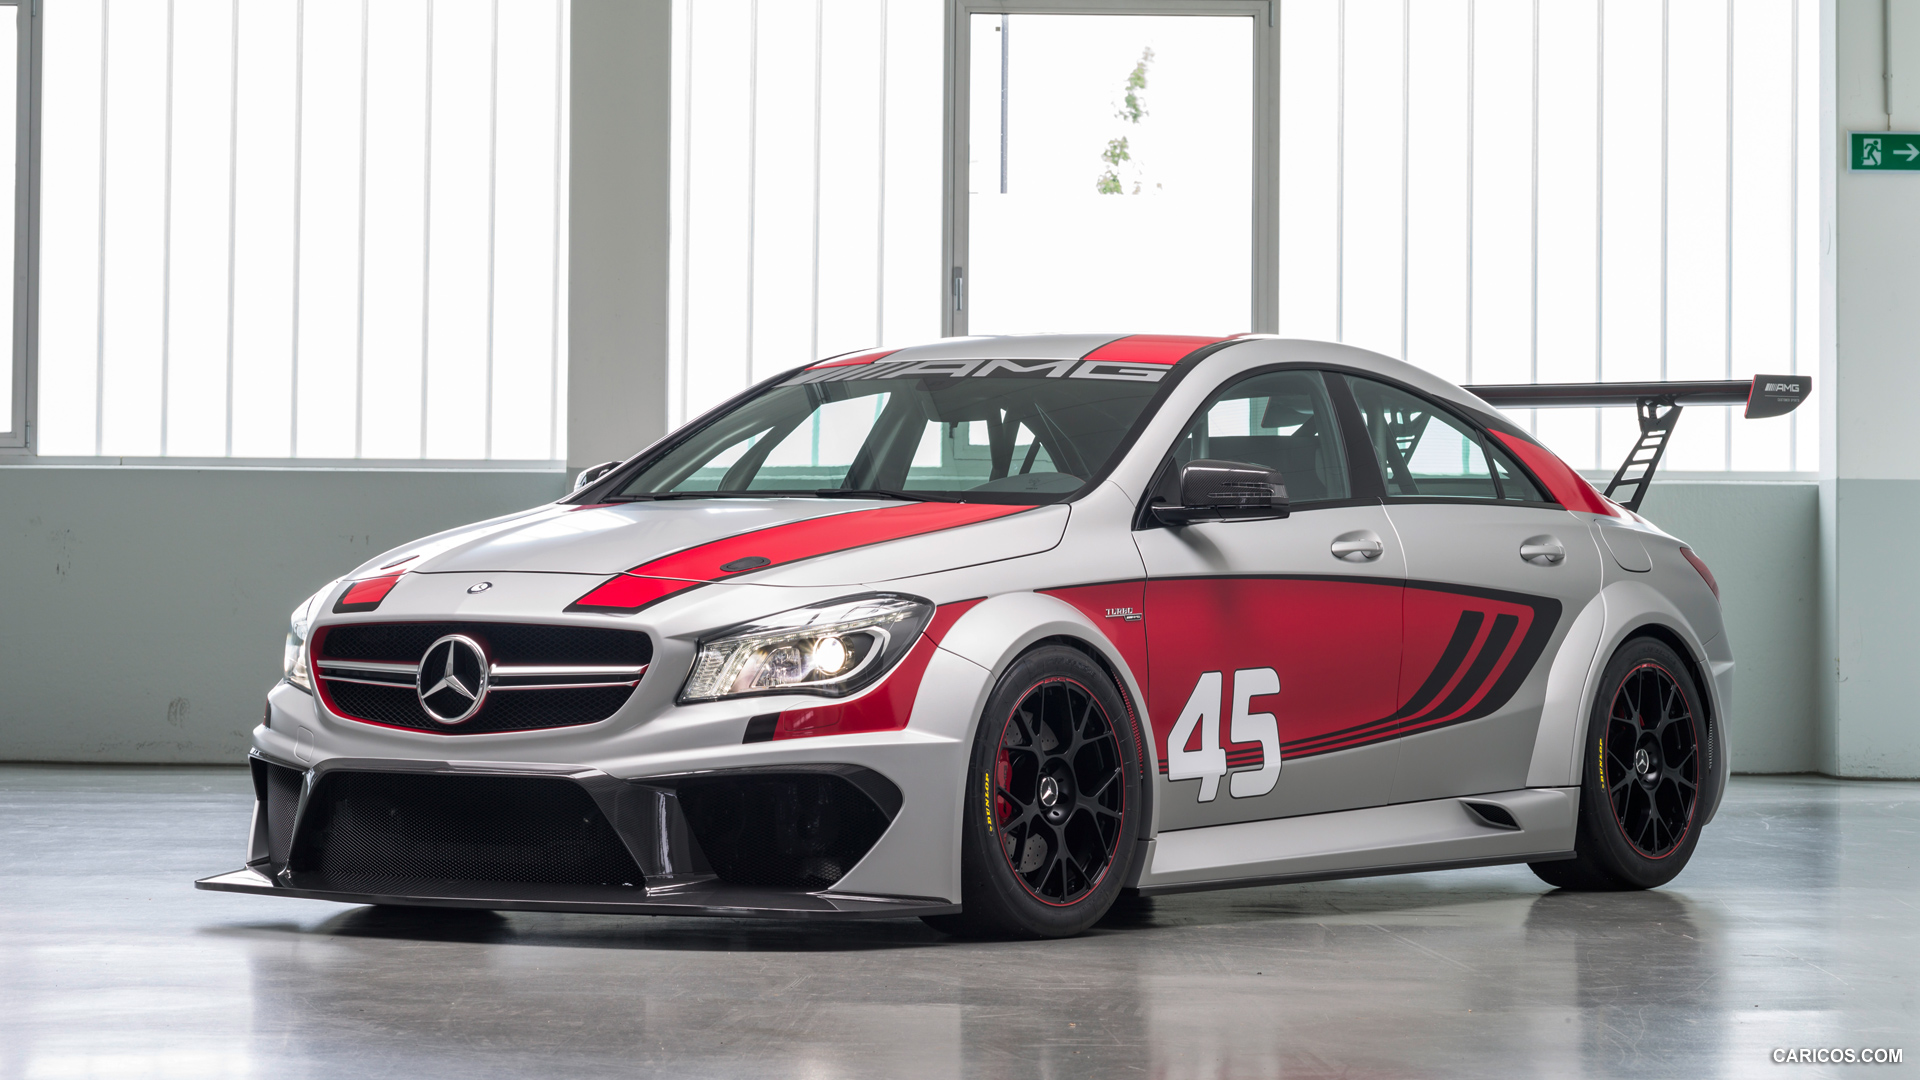 2013 Mercedes-Benz CLA 45 AMG Racing Series Concept  - Front, #13 of 26